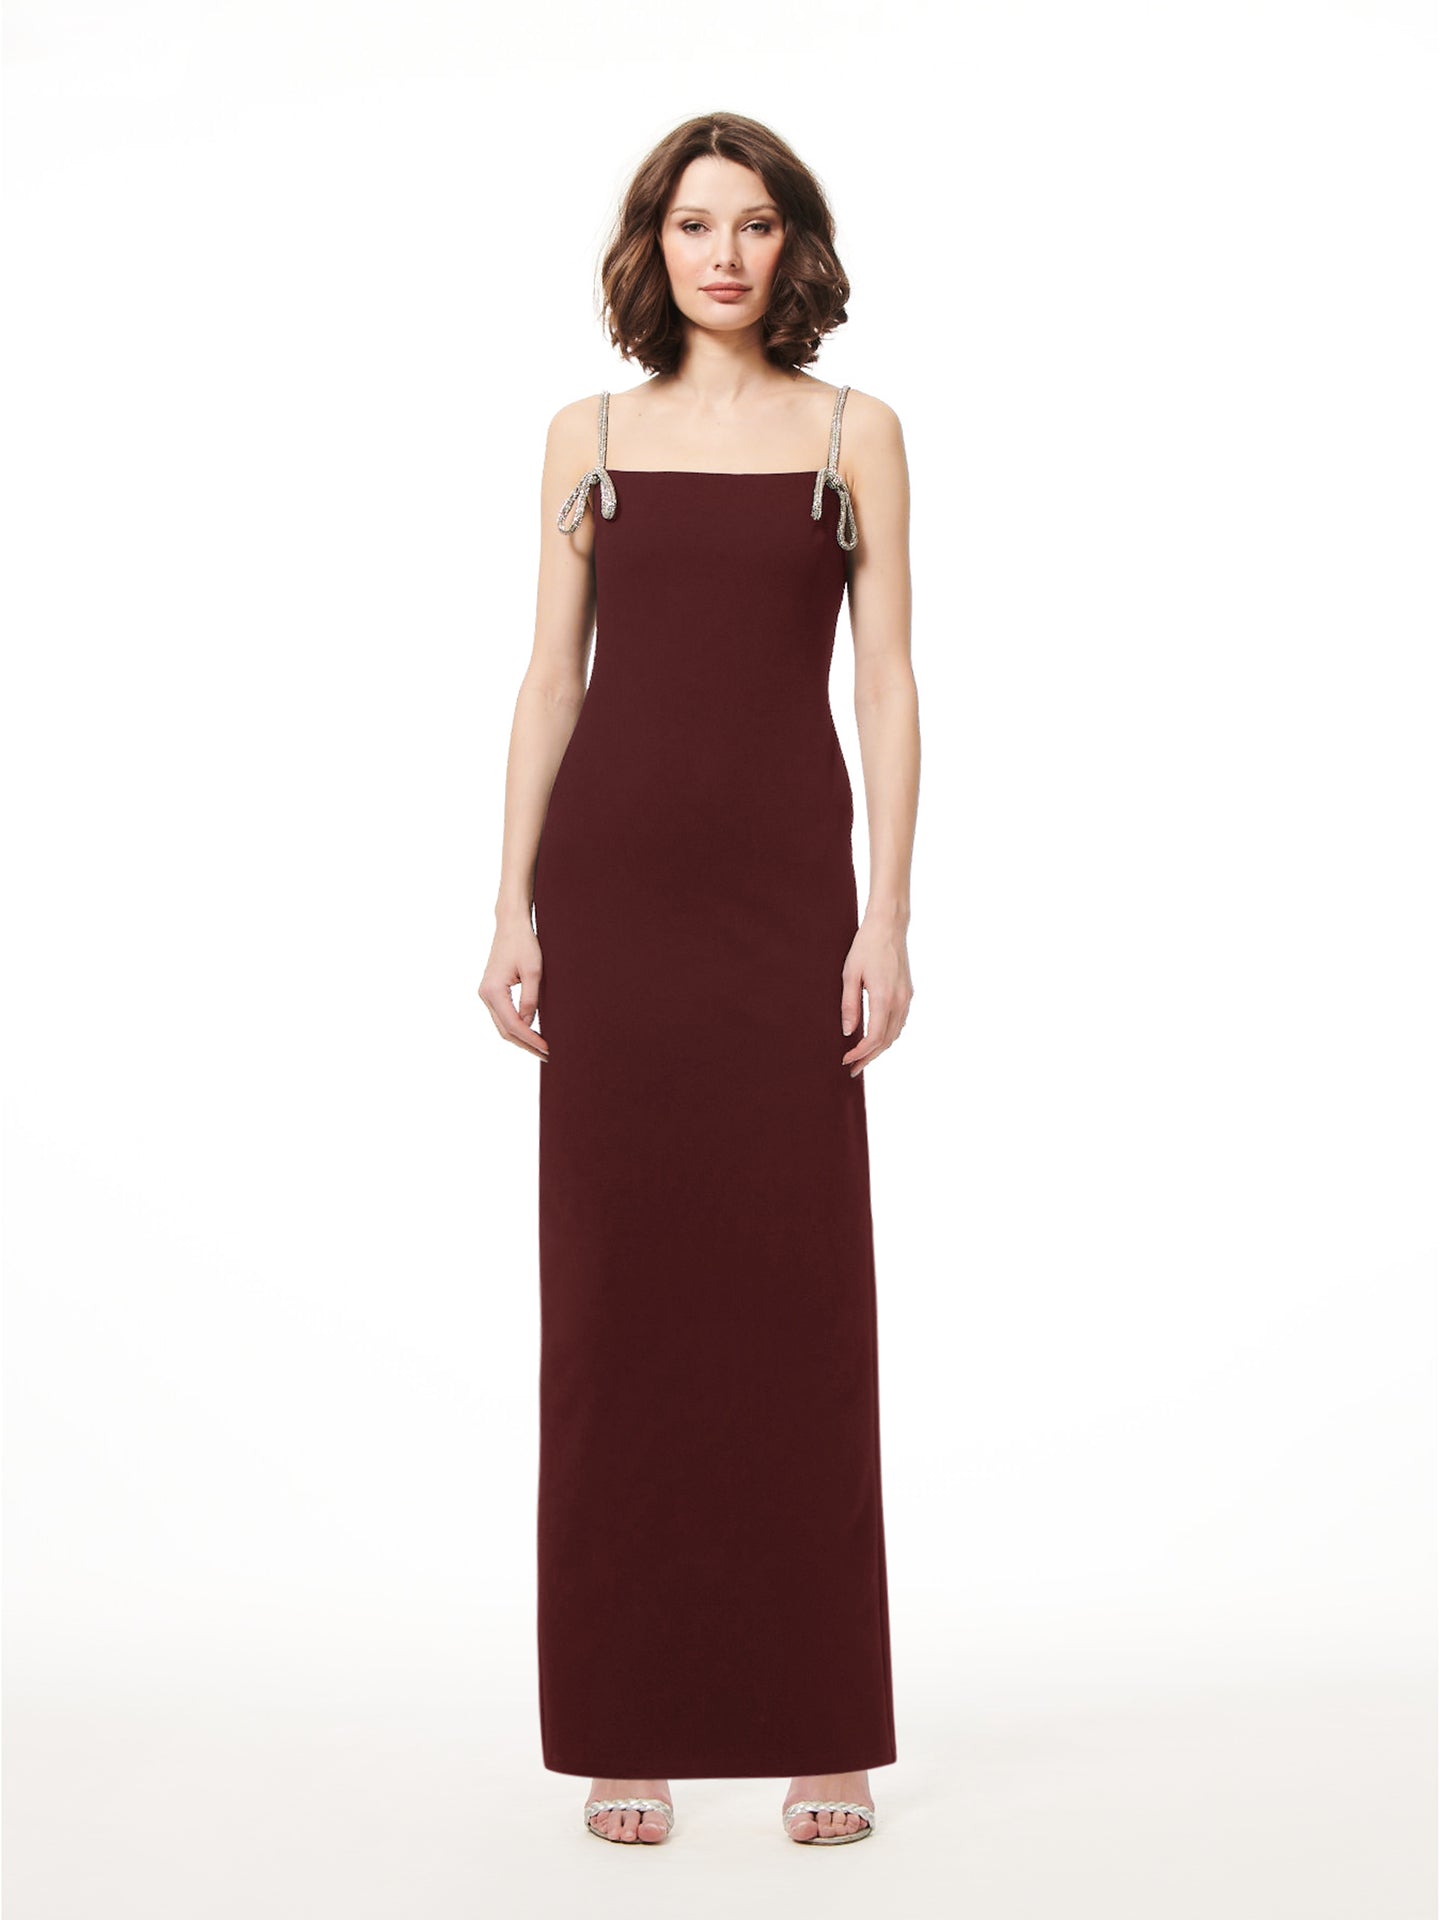 MERLOT STRETCH CREPE GOWN WITH CRYSTAL BOWS